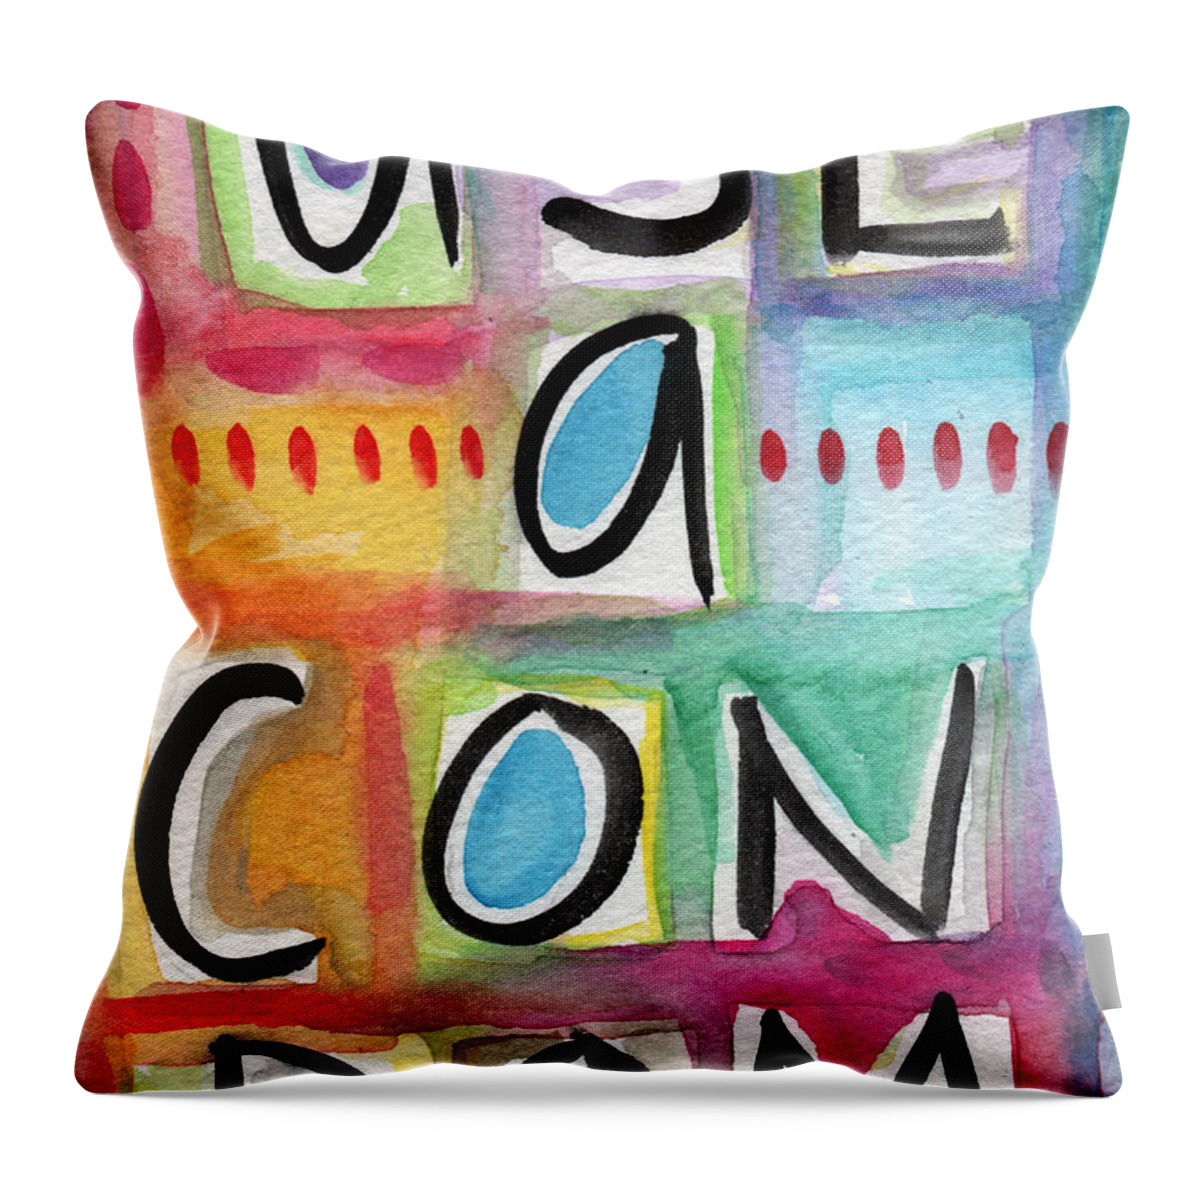 Sign Throw Pillow featuring the painting Use A Condom by Linda Woods